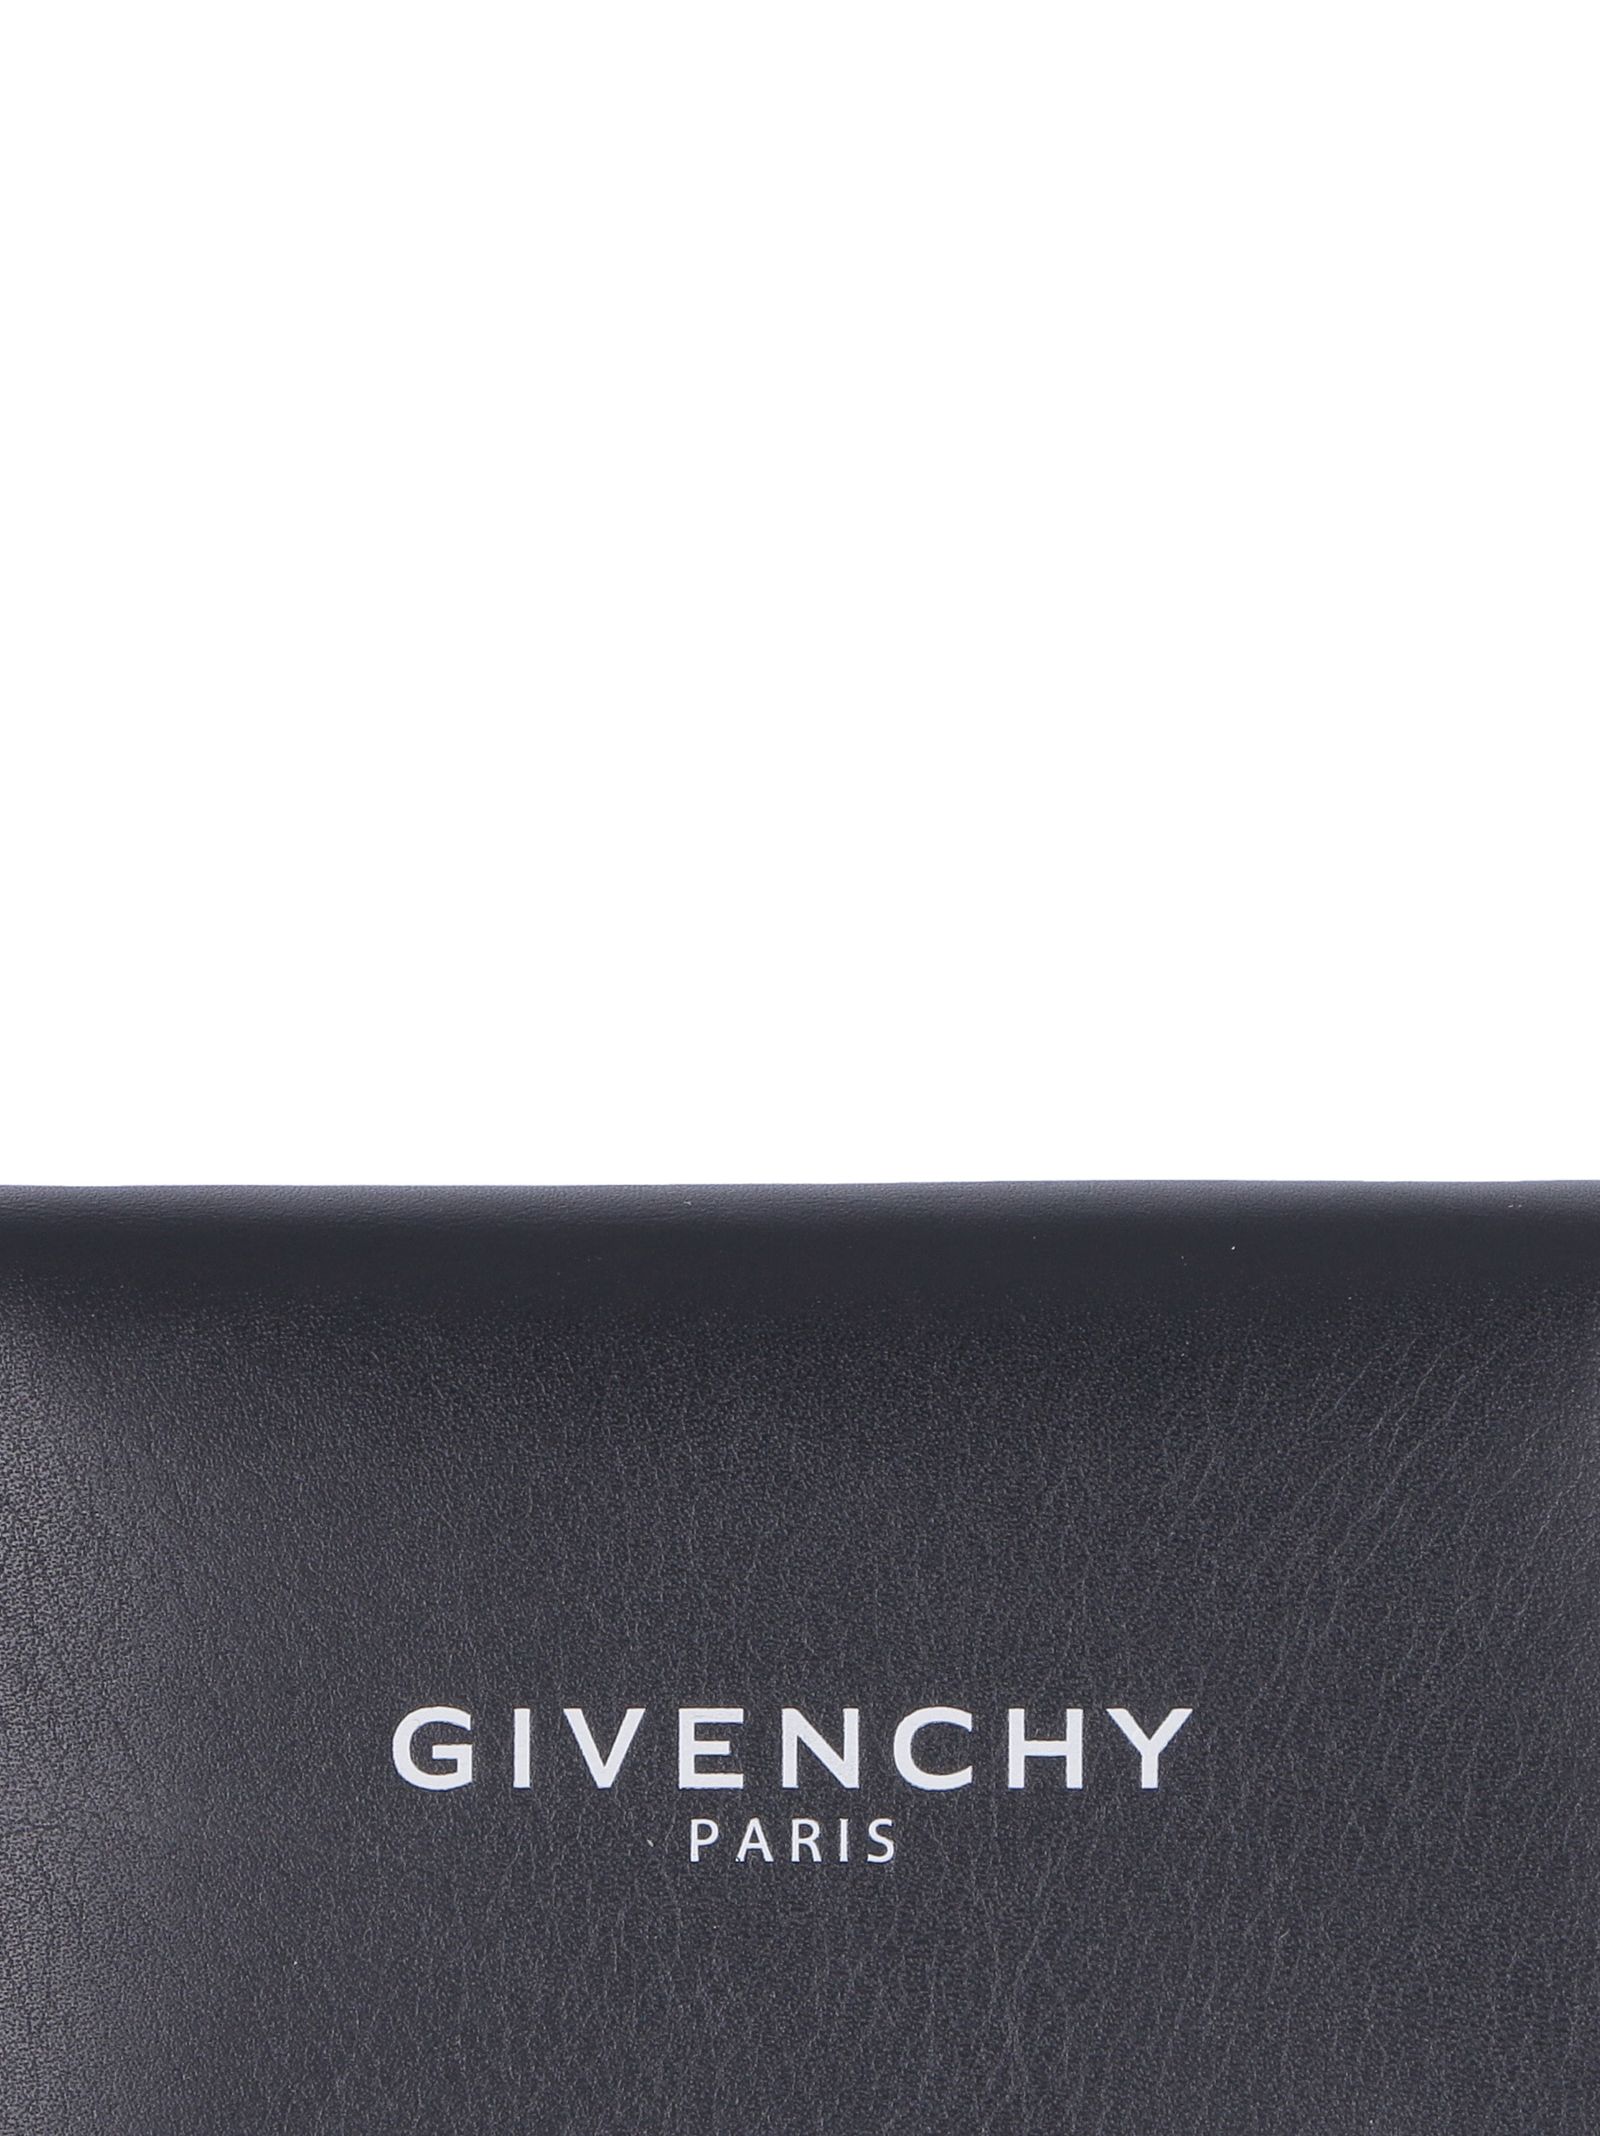 GIVENCHY LOGOED LEATHER CARD HOLDER,10911096